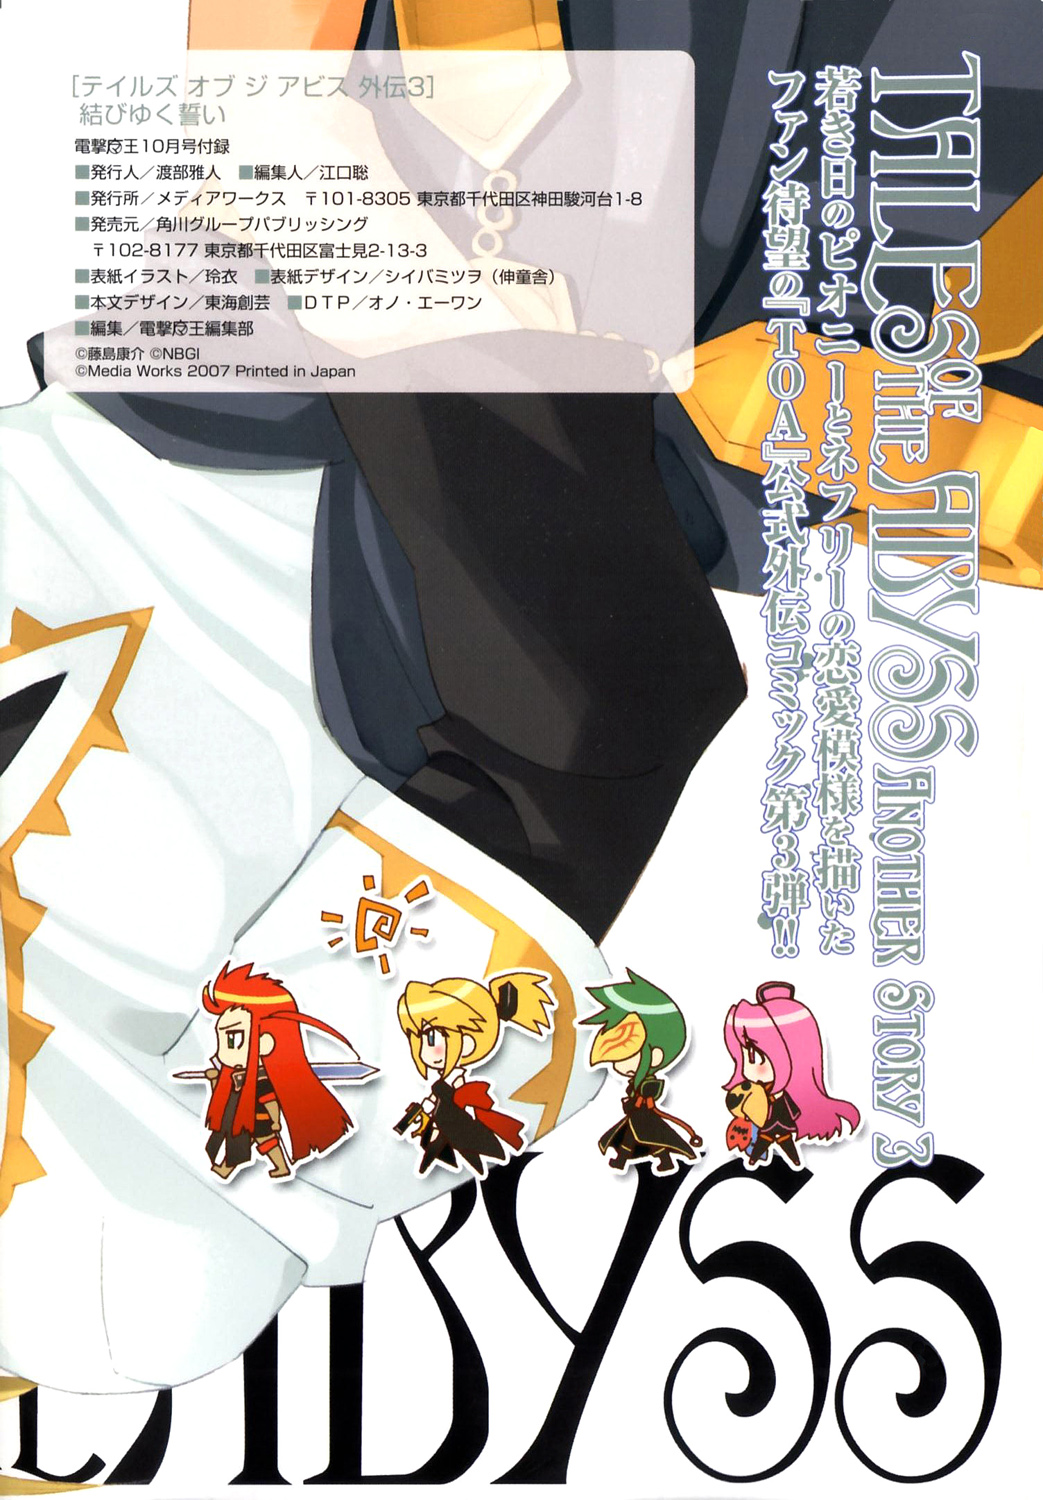 Tales Of The Abyss - Another Story Vol.3 Chapter 0 V2 : Another Story 3 - Peony And Nephry Gaiden: Musubi Yuku Chikai - Picture 3